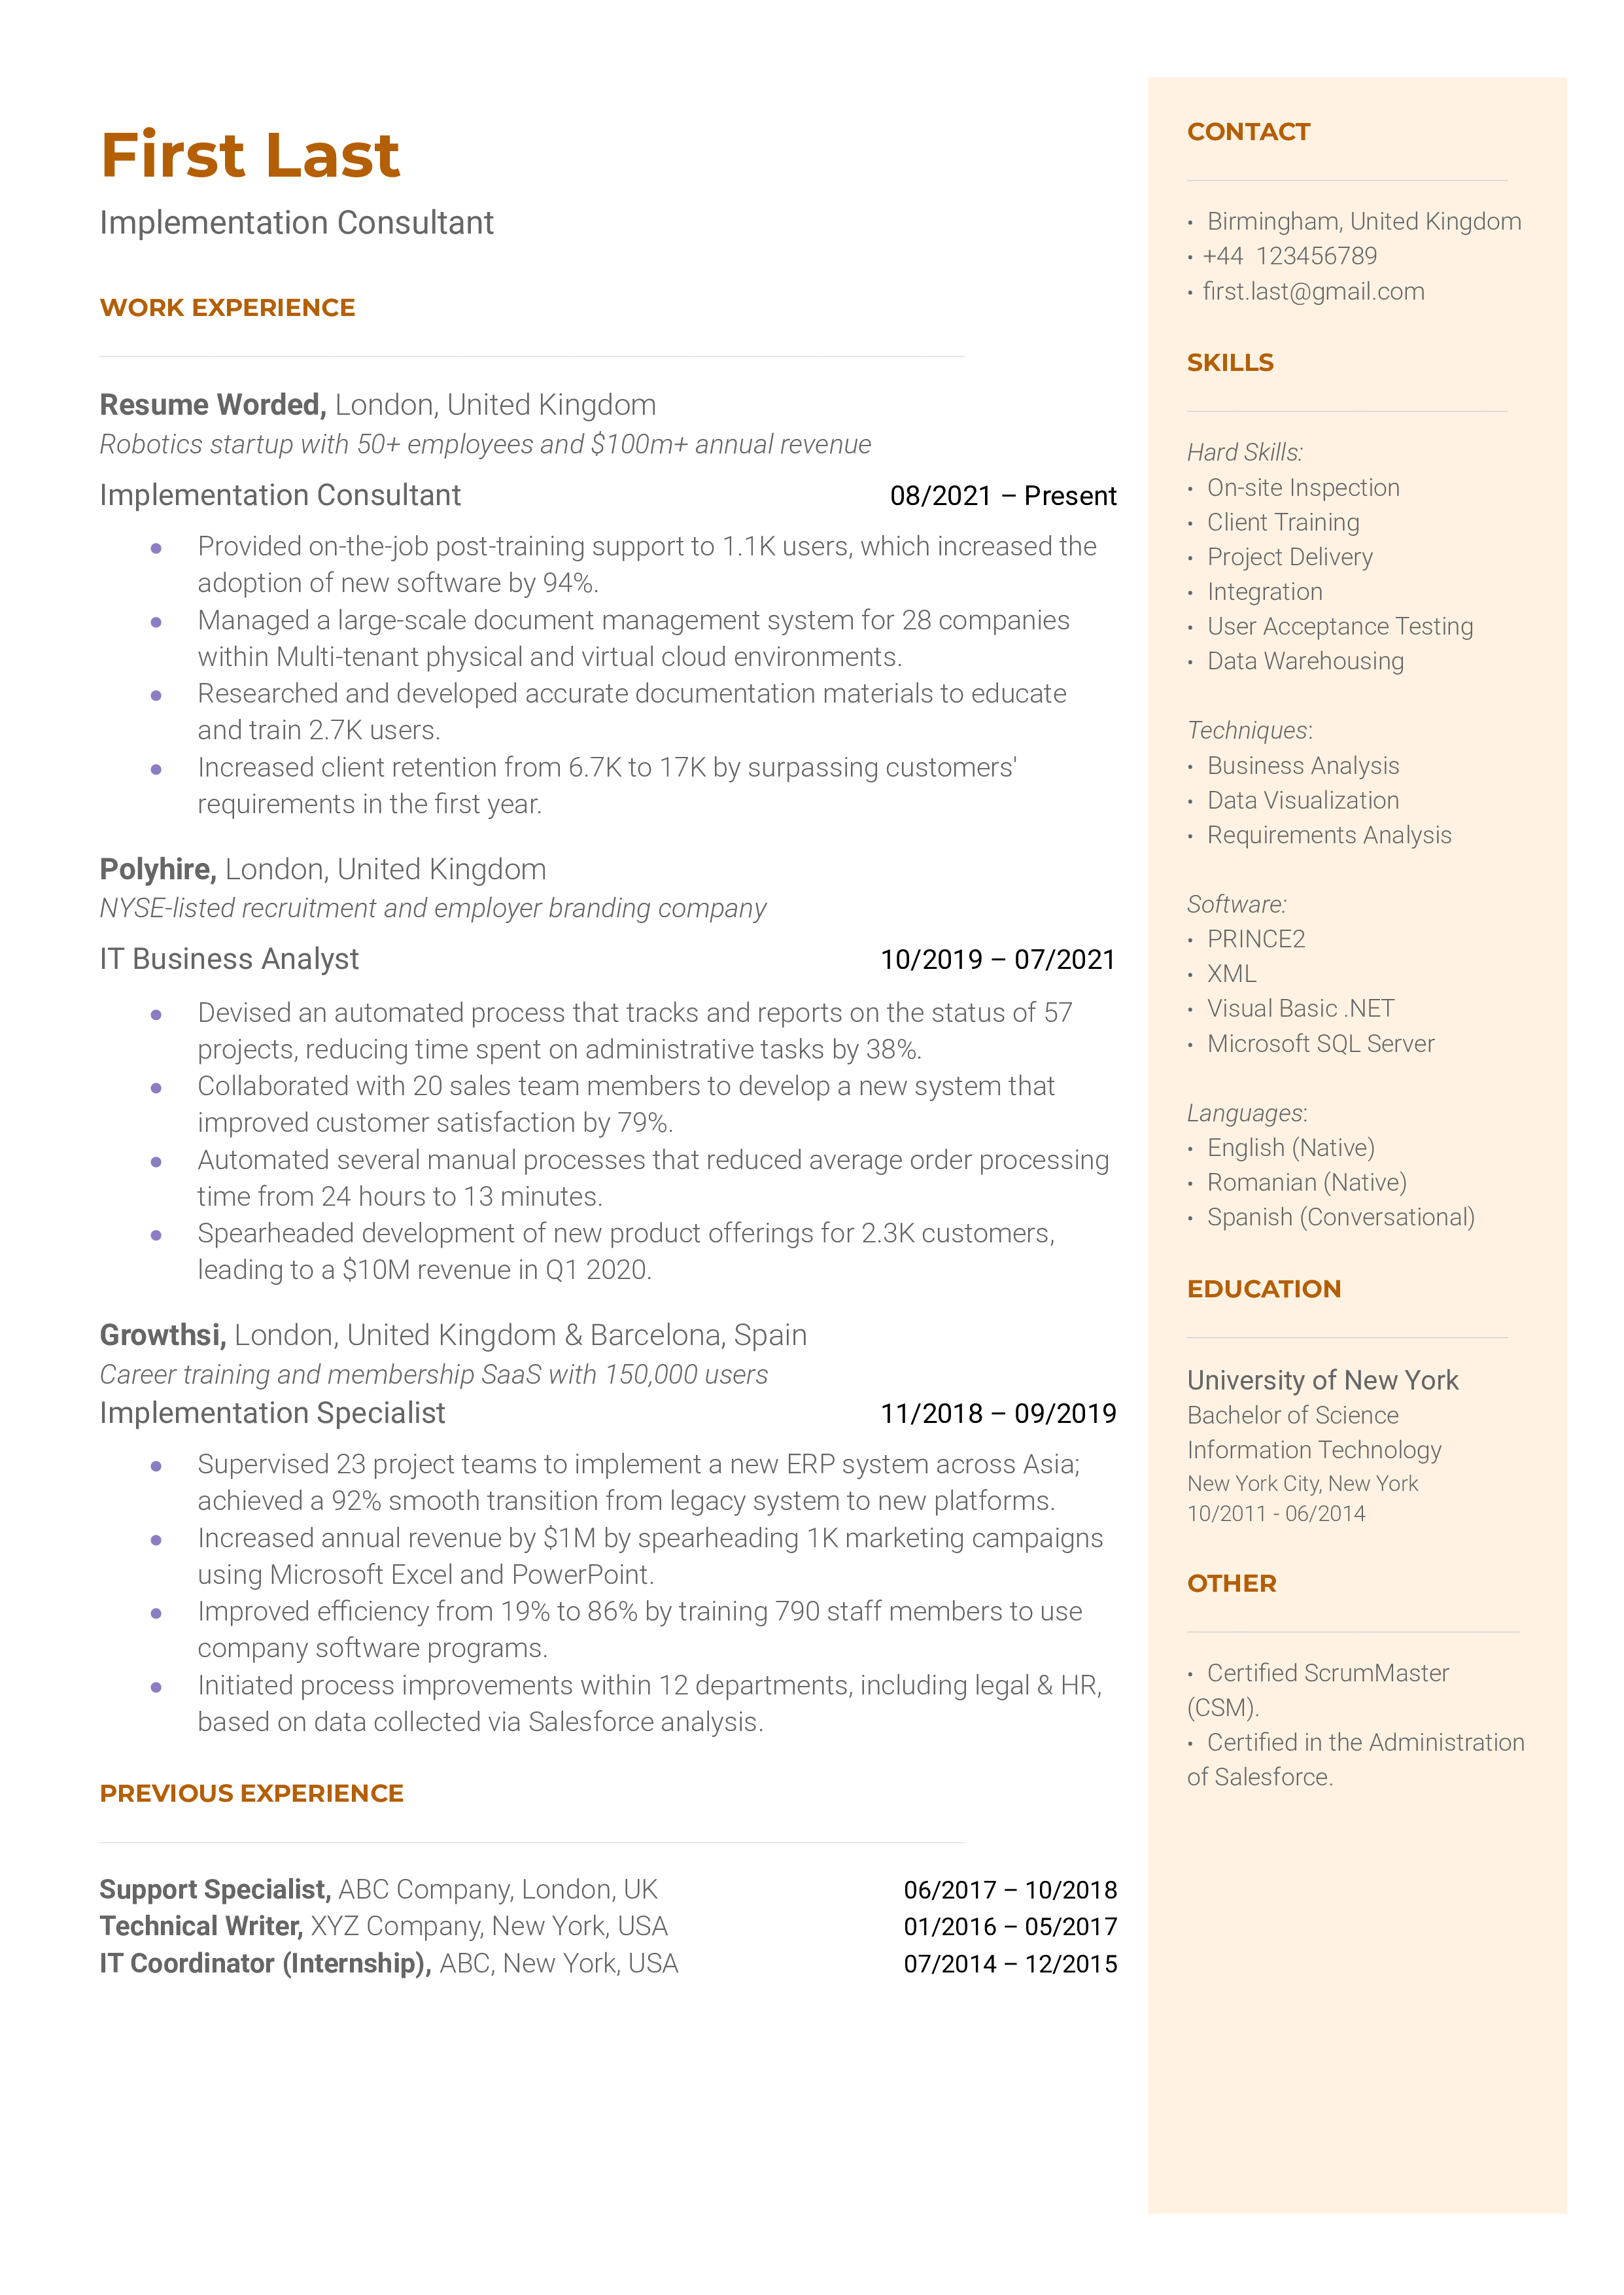 An implementation consultant resume template that highlights technical skills